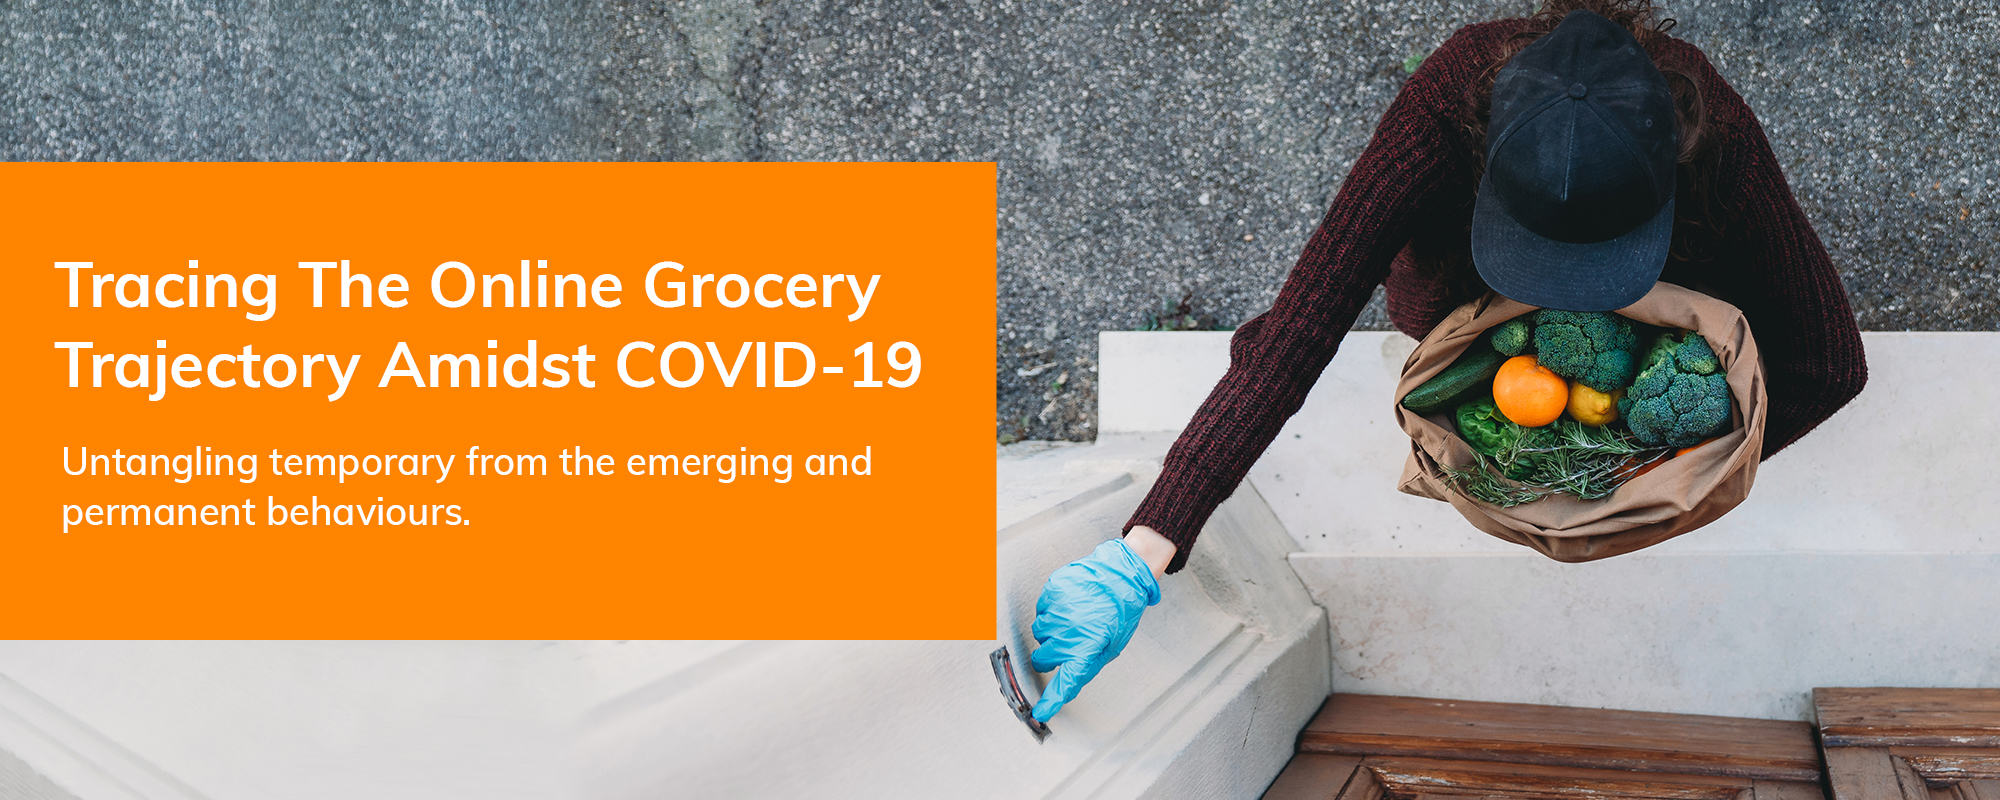 Tracing the E-grocery Trajectory Amidst COVID-19